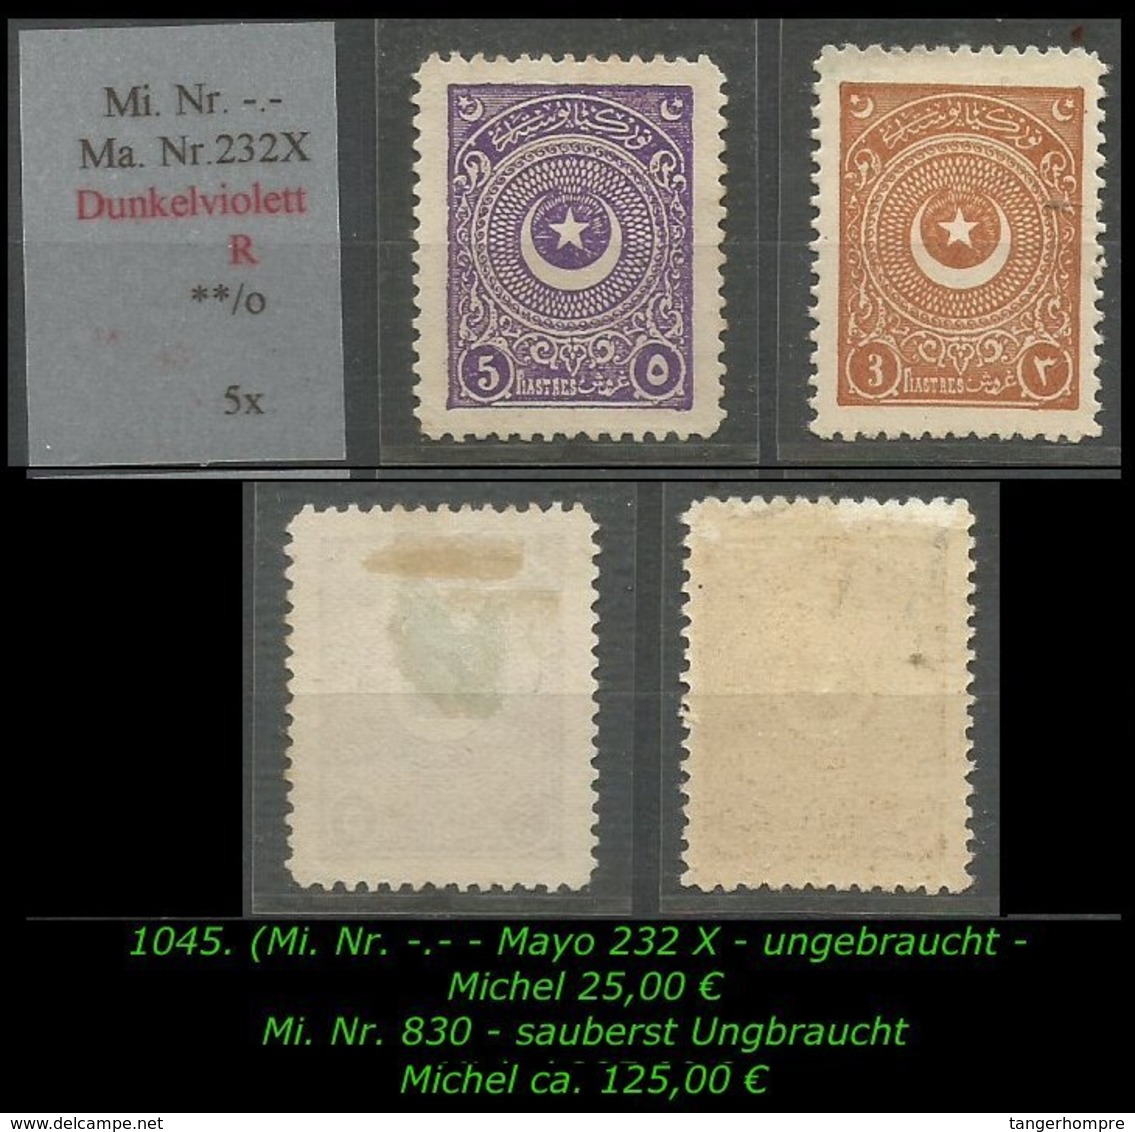 EARLY OTTOMAN SPECIALIZED FOR SPECIALIST, SEE...Mi. Nr. -.- (832) + 830 -R- - Ongebruikt